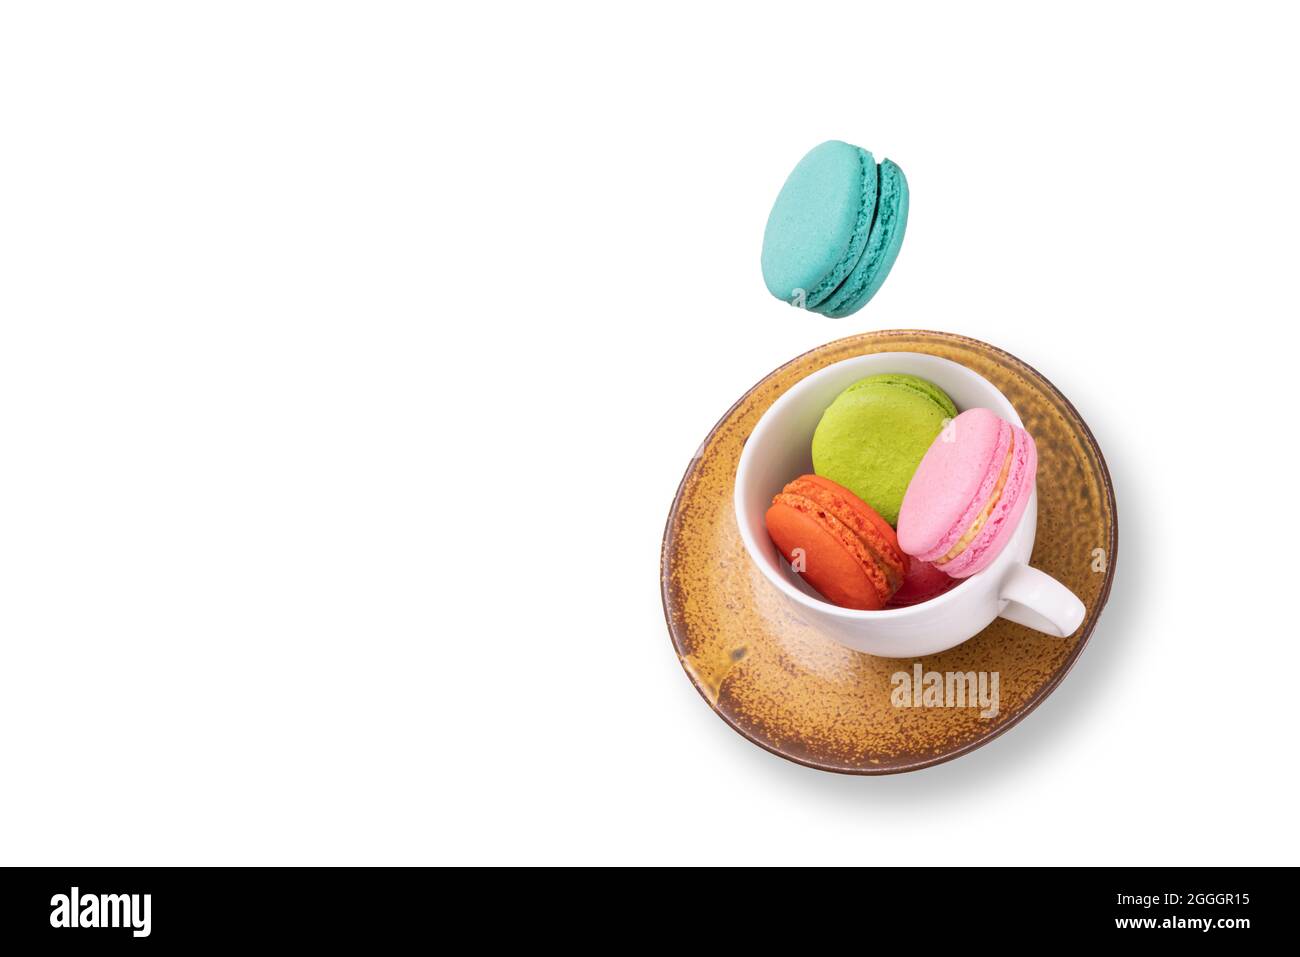 Colorful macaroons  floating on a white tea cup and a orange ceramic plate. Isolation on white back ground. Food levitation concept. Stock Photo